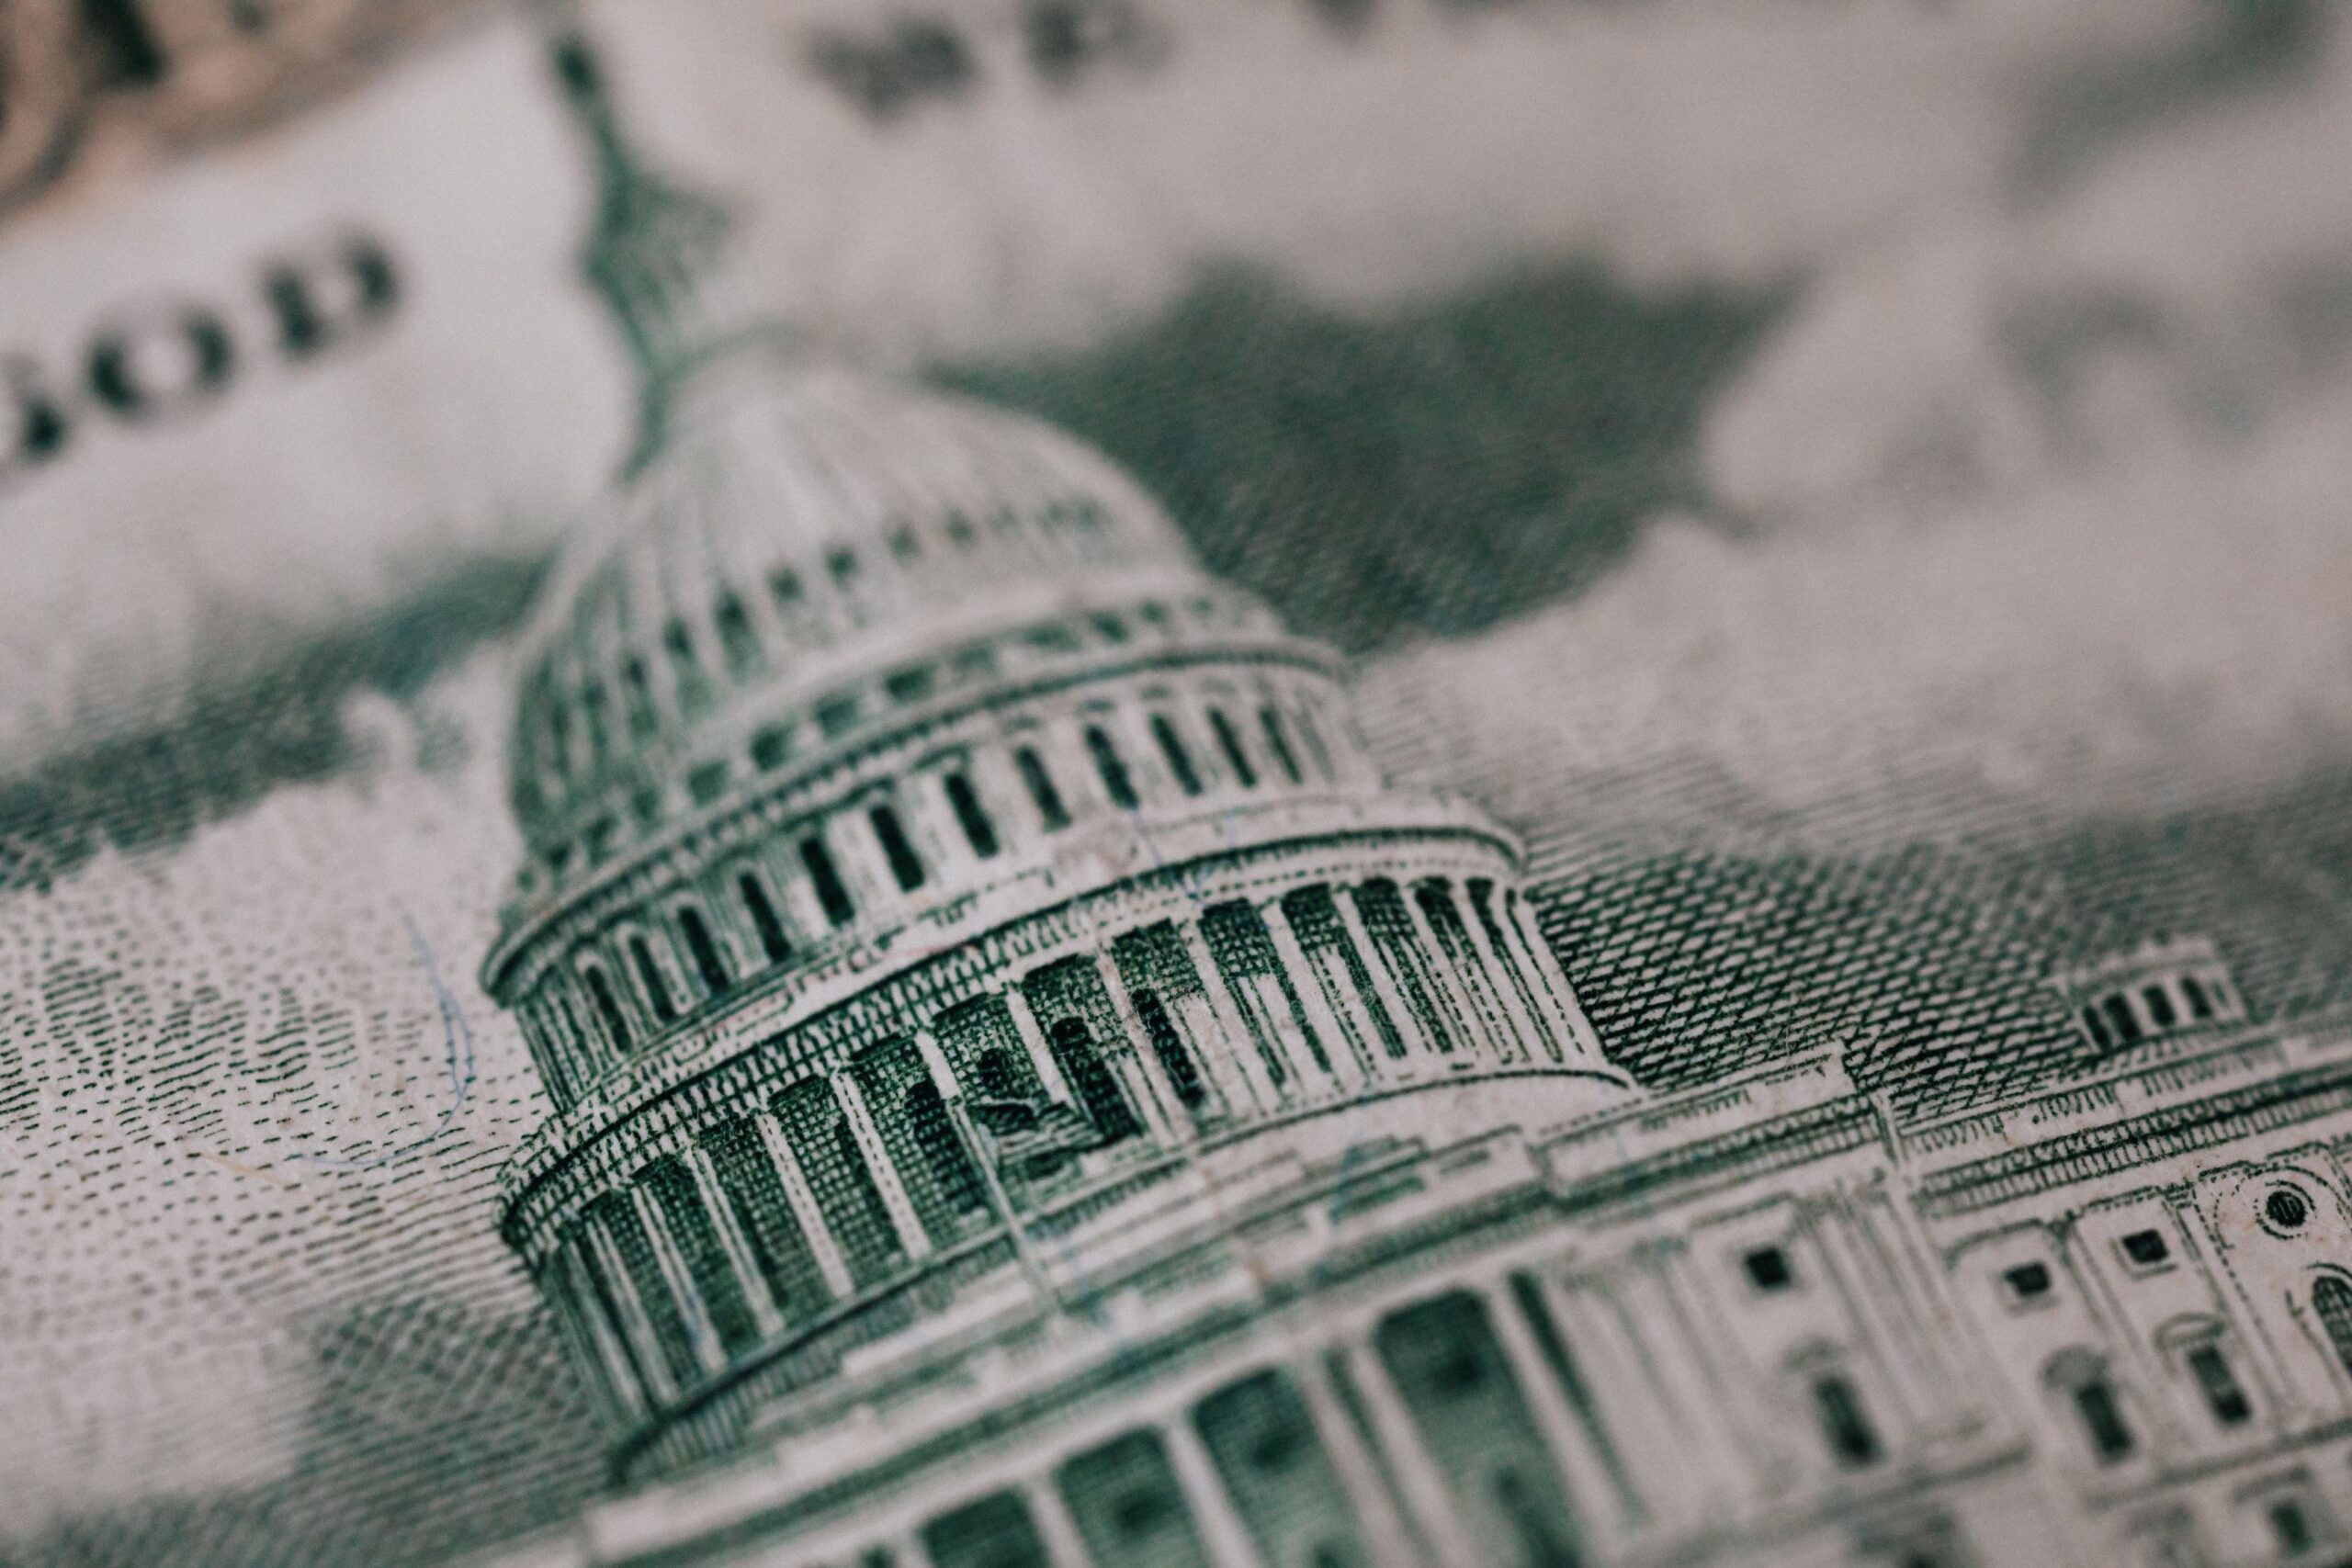 The U.S. Capitol Building on a banknote